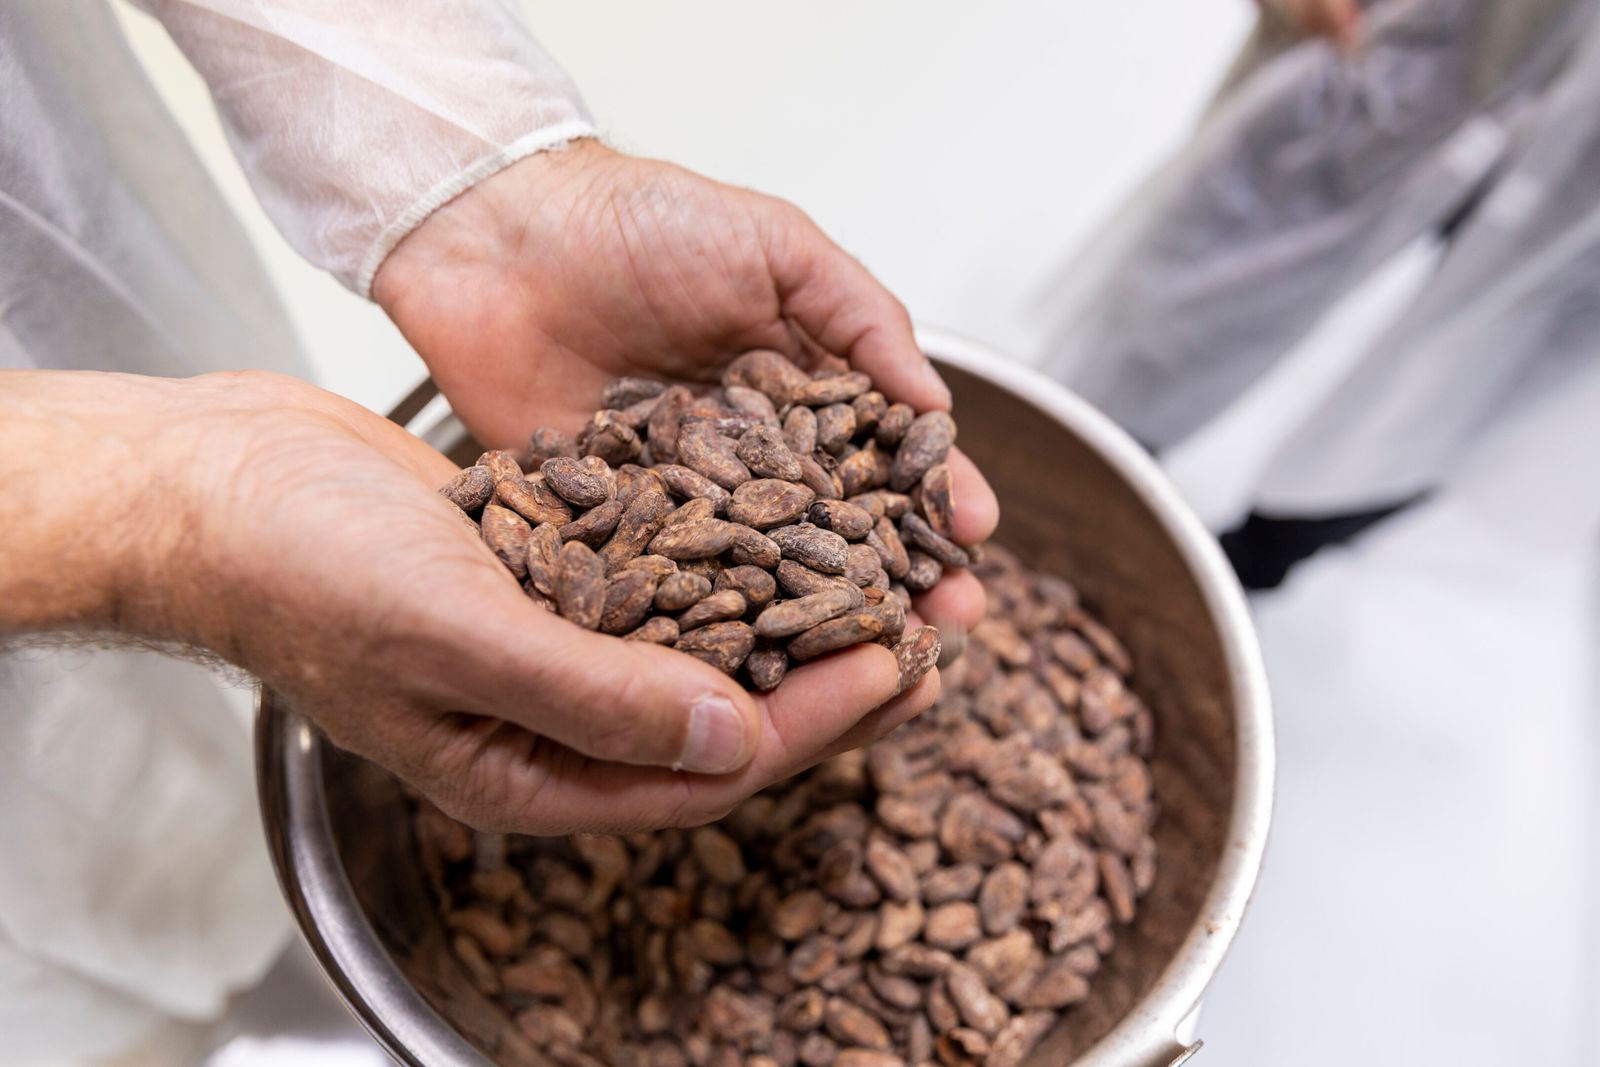 A PRONATEC employee checks the quality of the cocoa beans.